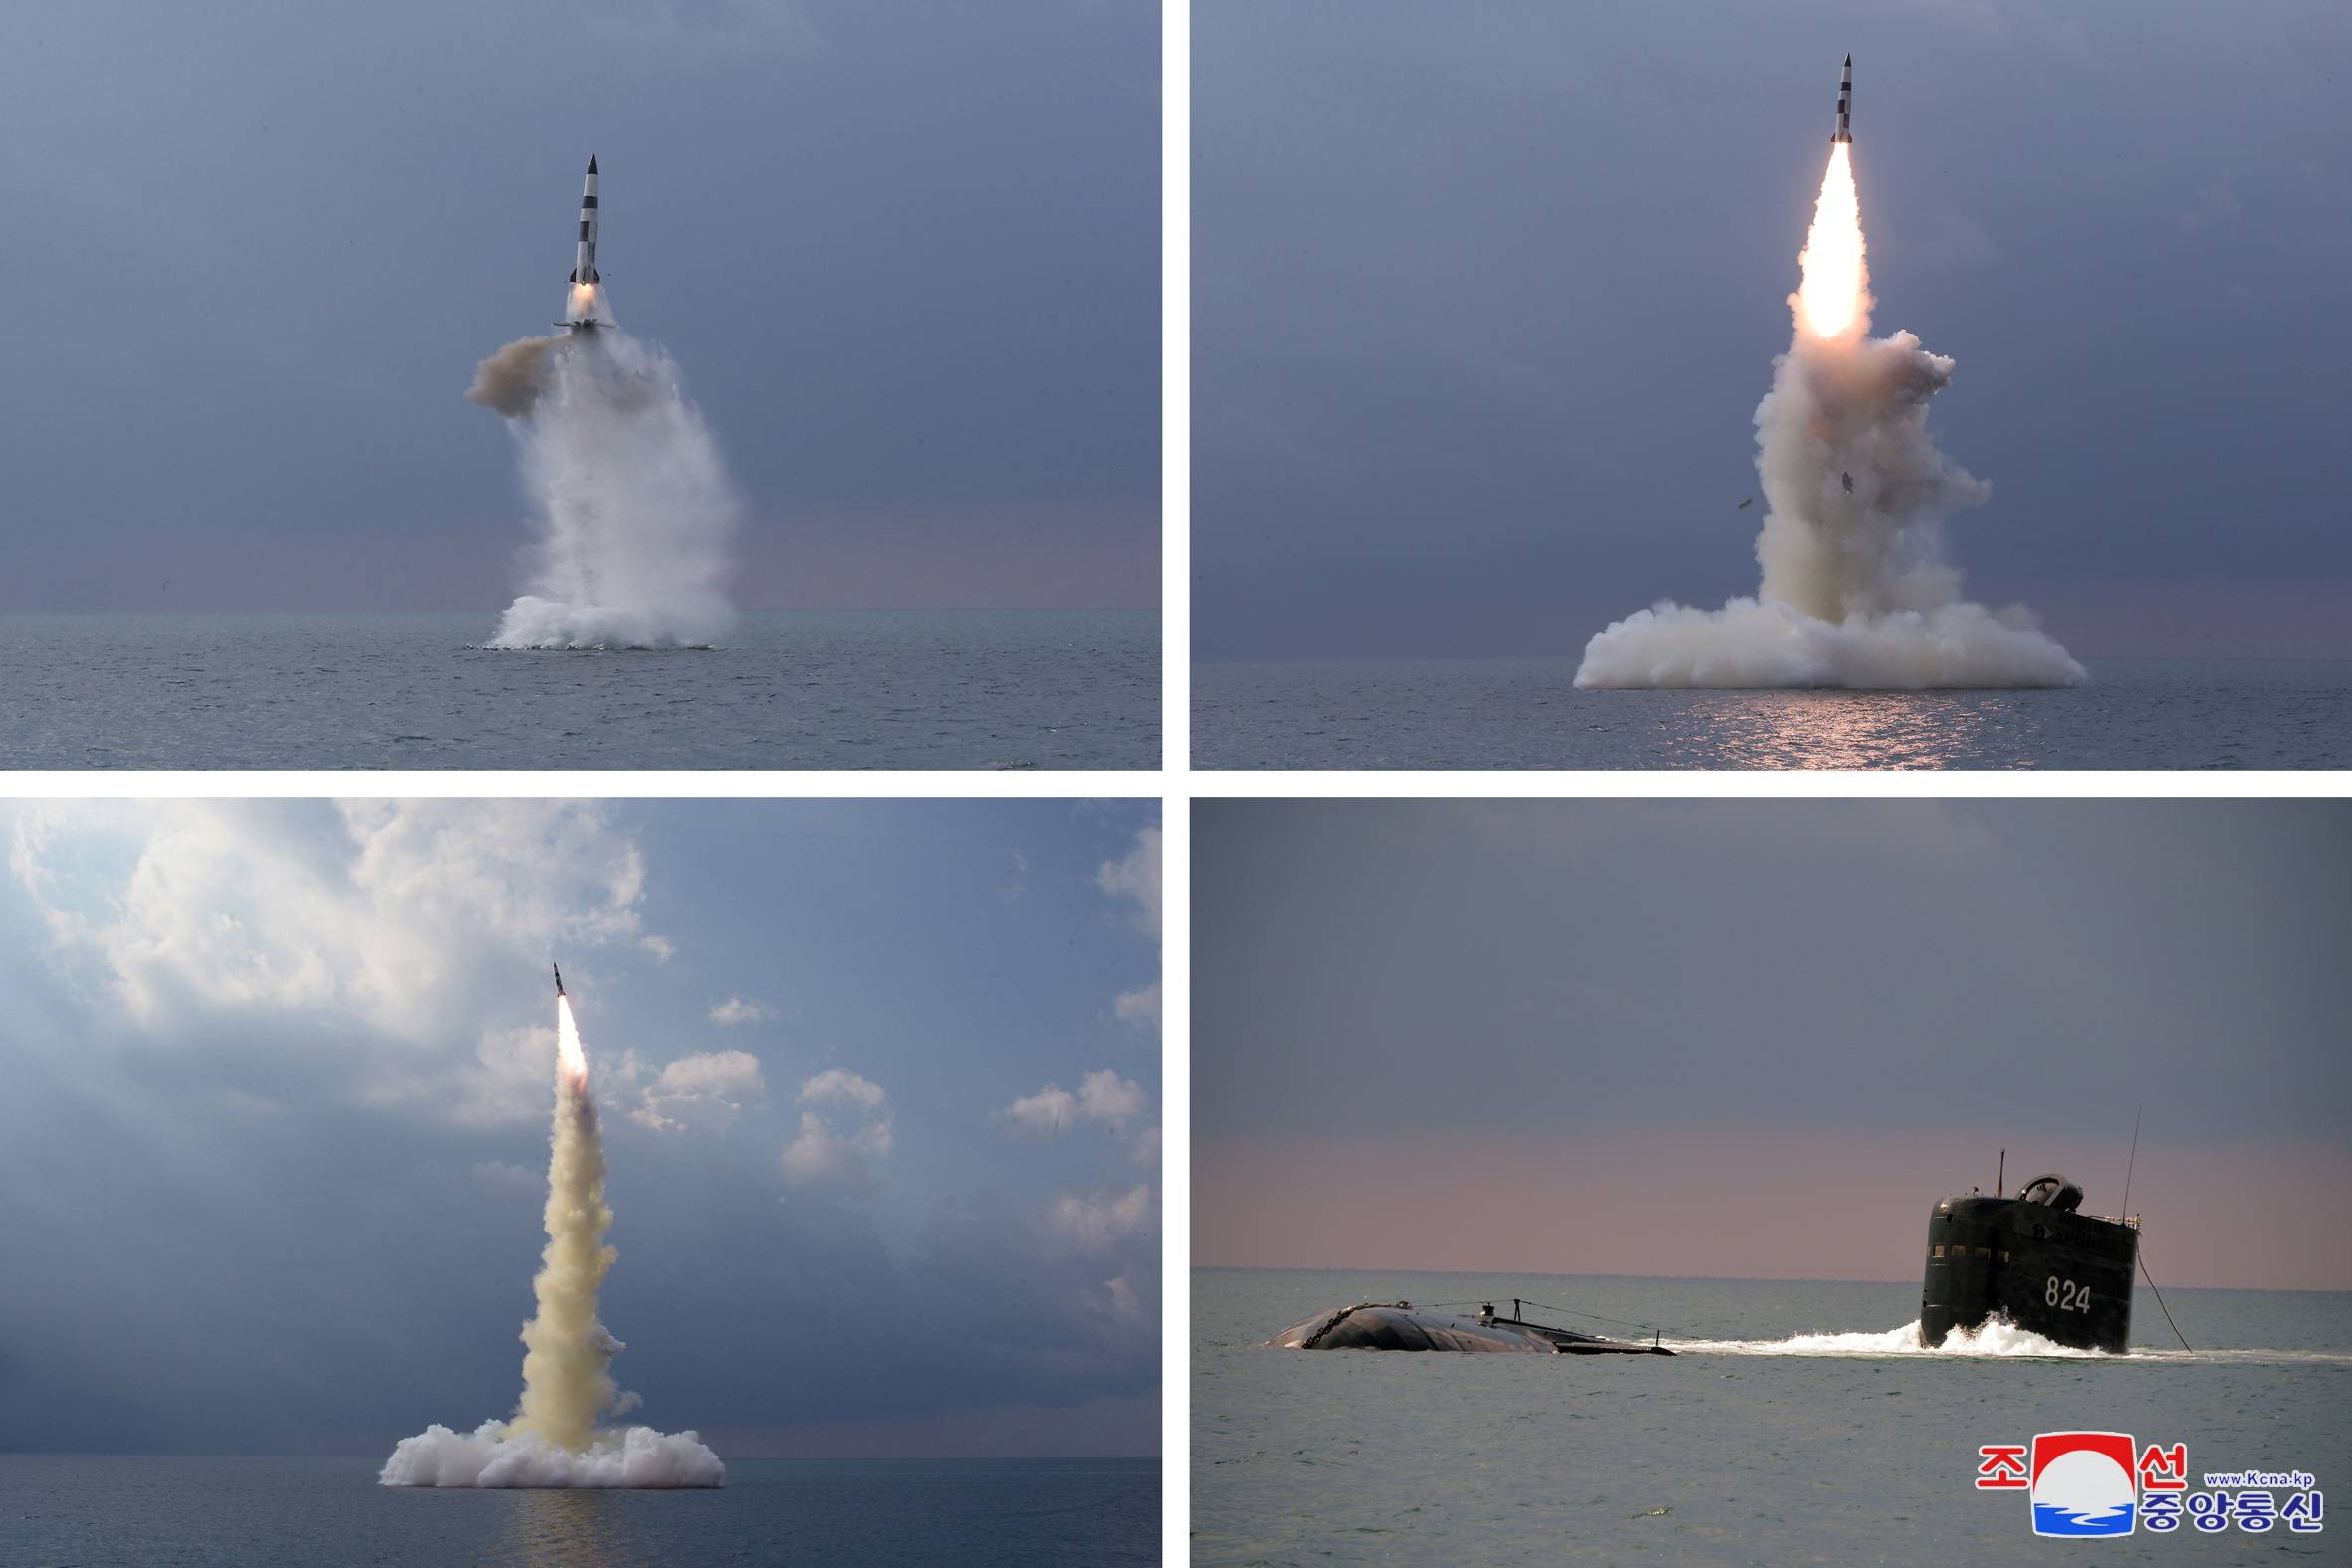 North Korea’s Submarine Missile Program: Implications for Global Security